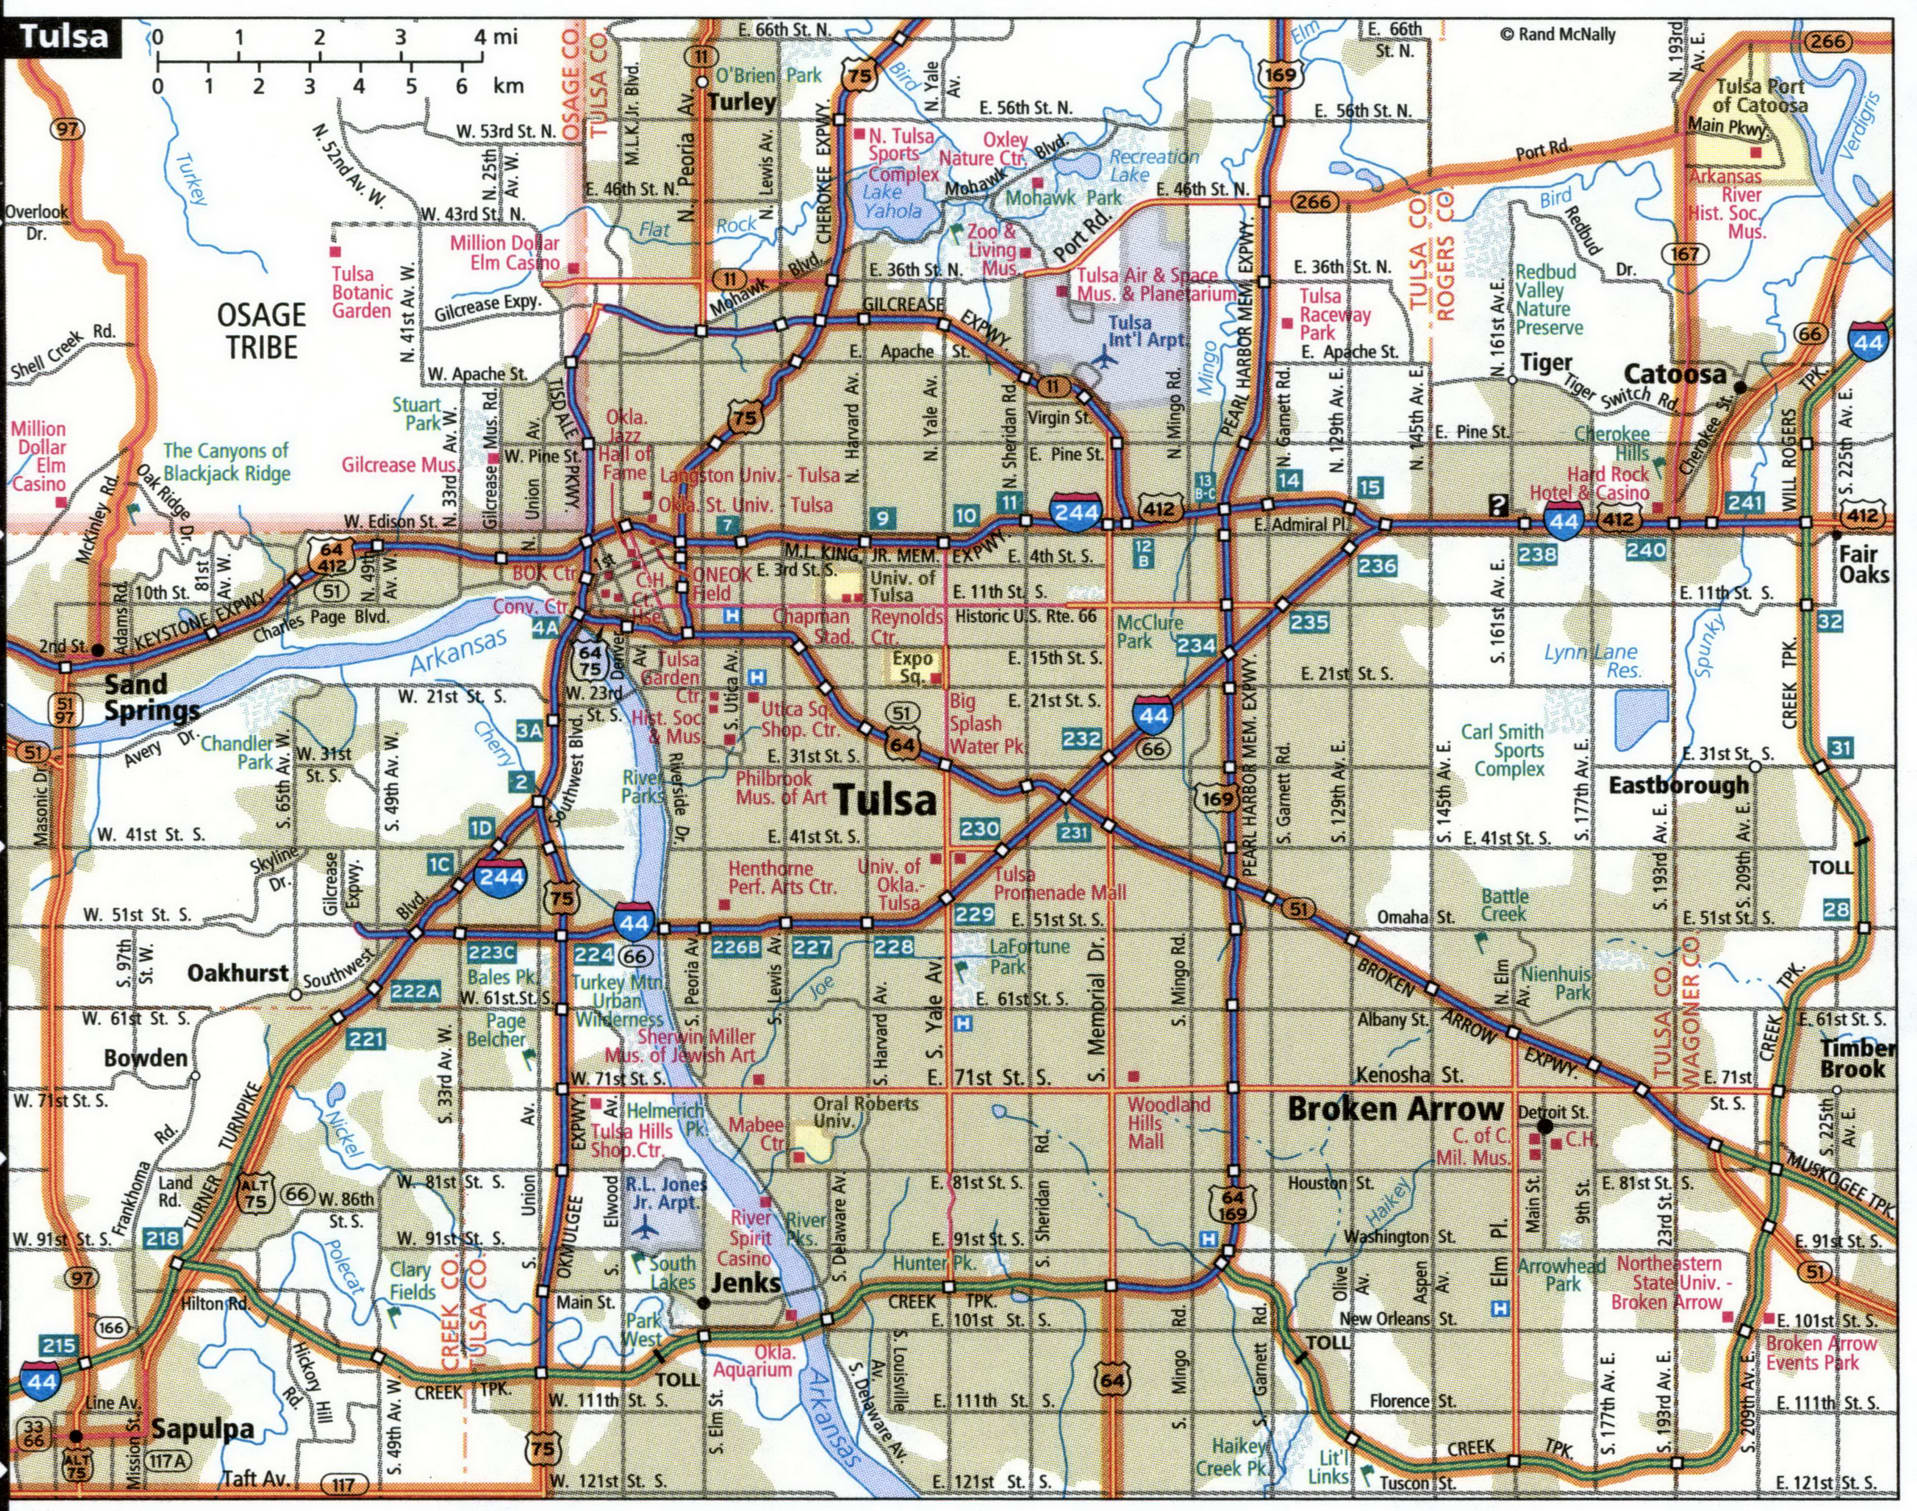 Tulsa city map for truckers